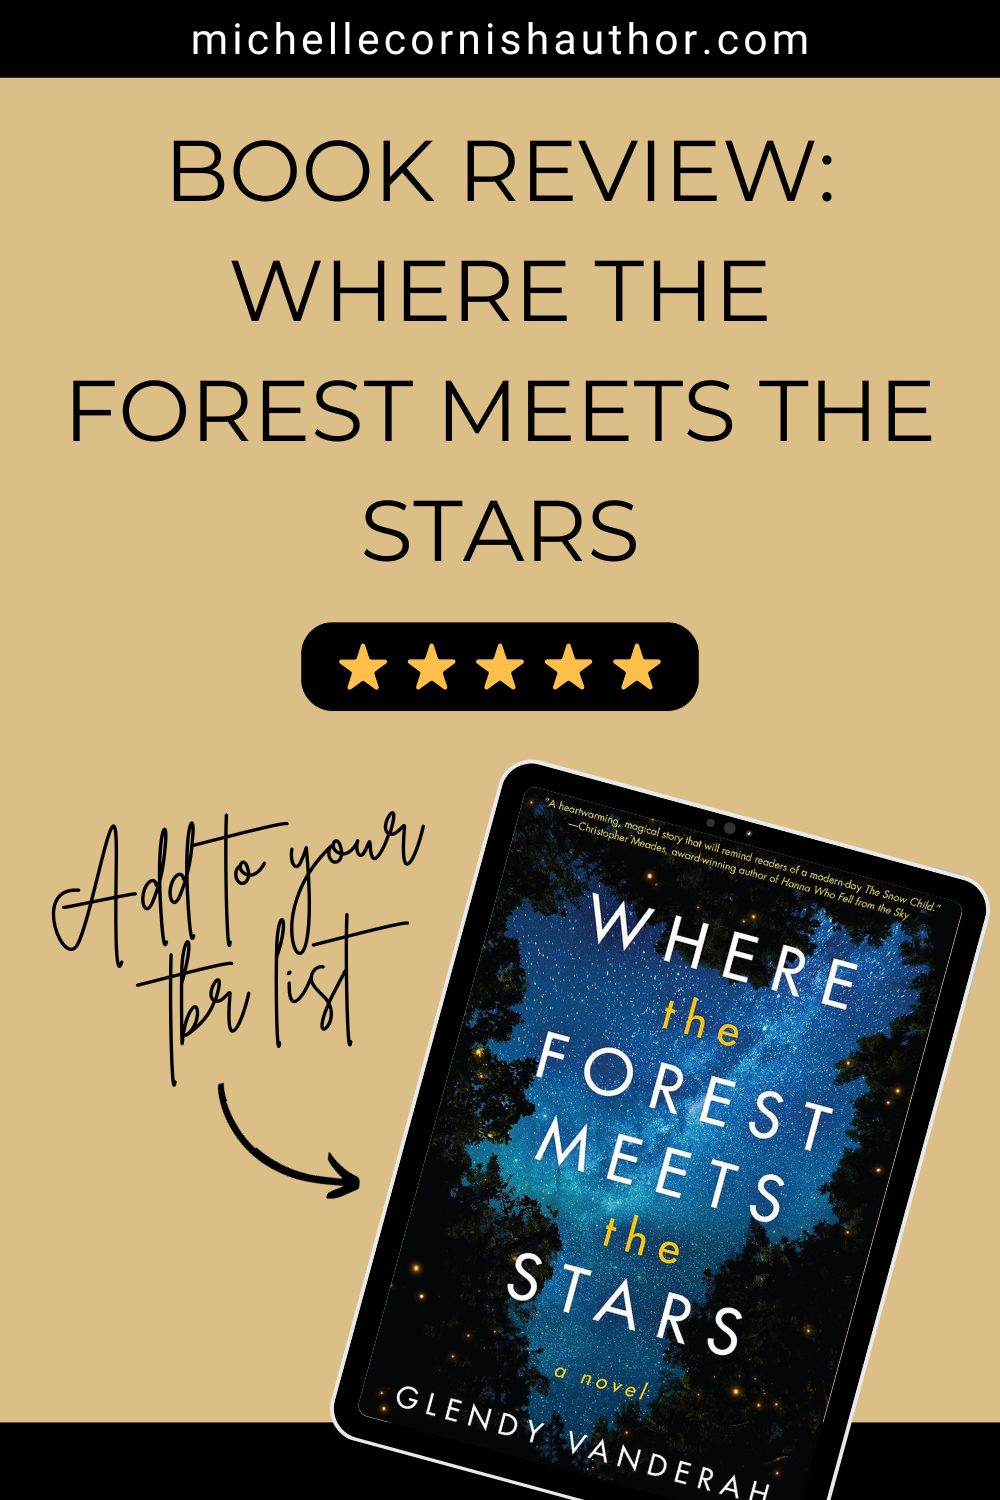 Book Review of Where the Forest Meets the Stars by Glendy Vanderah